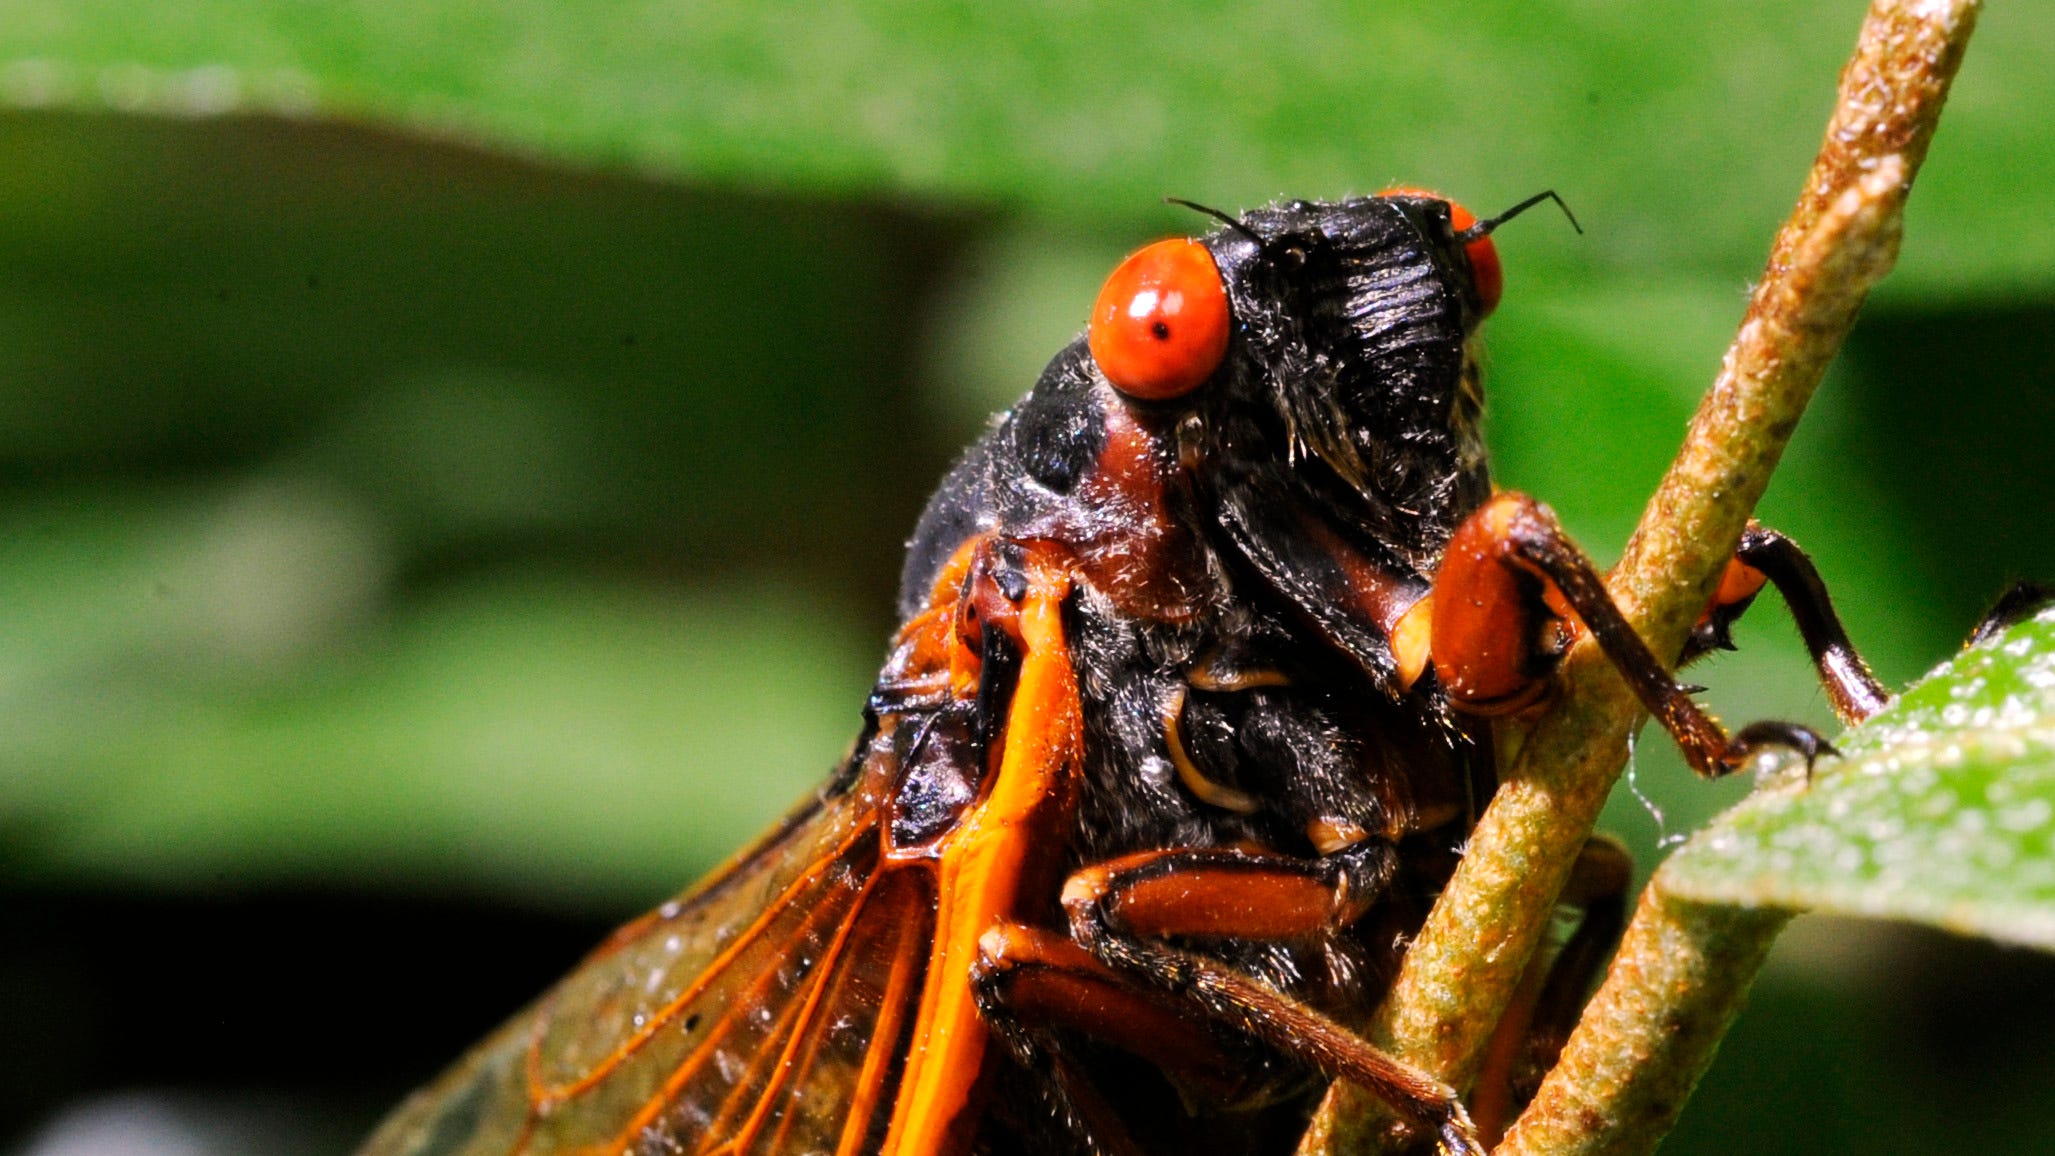 17year cicadas will emerge in Ohio soon. How they are beneficial